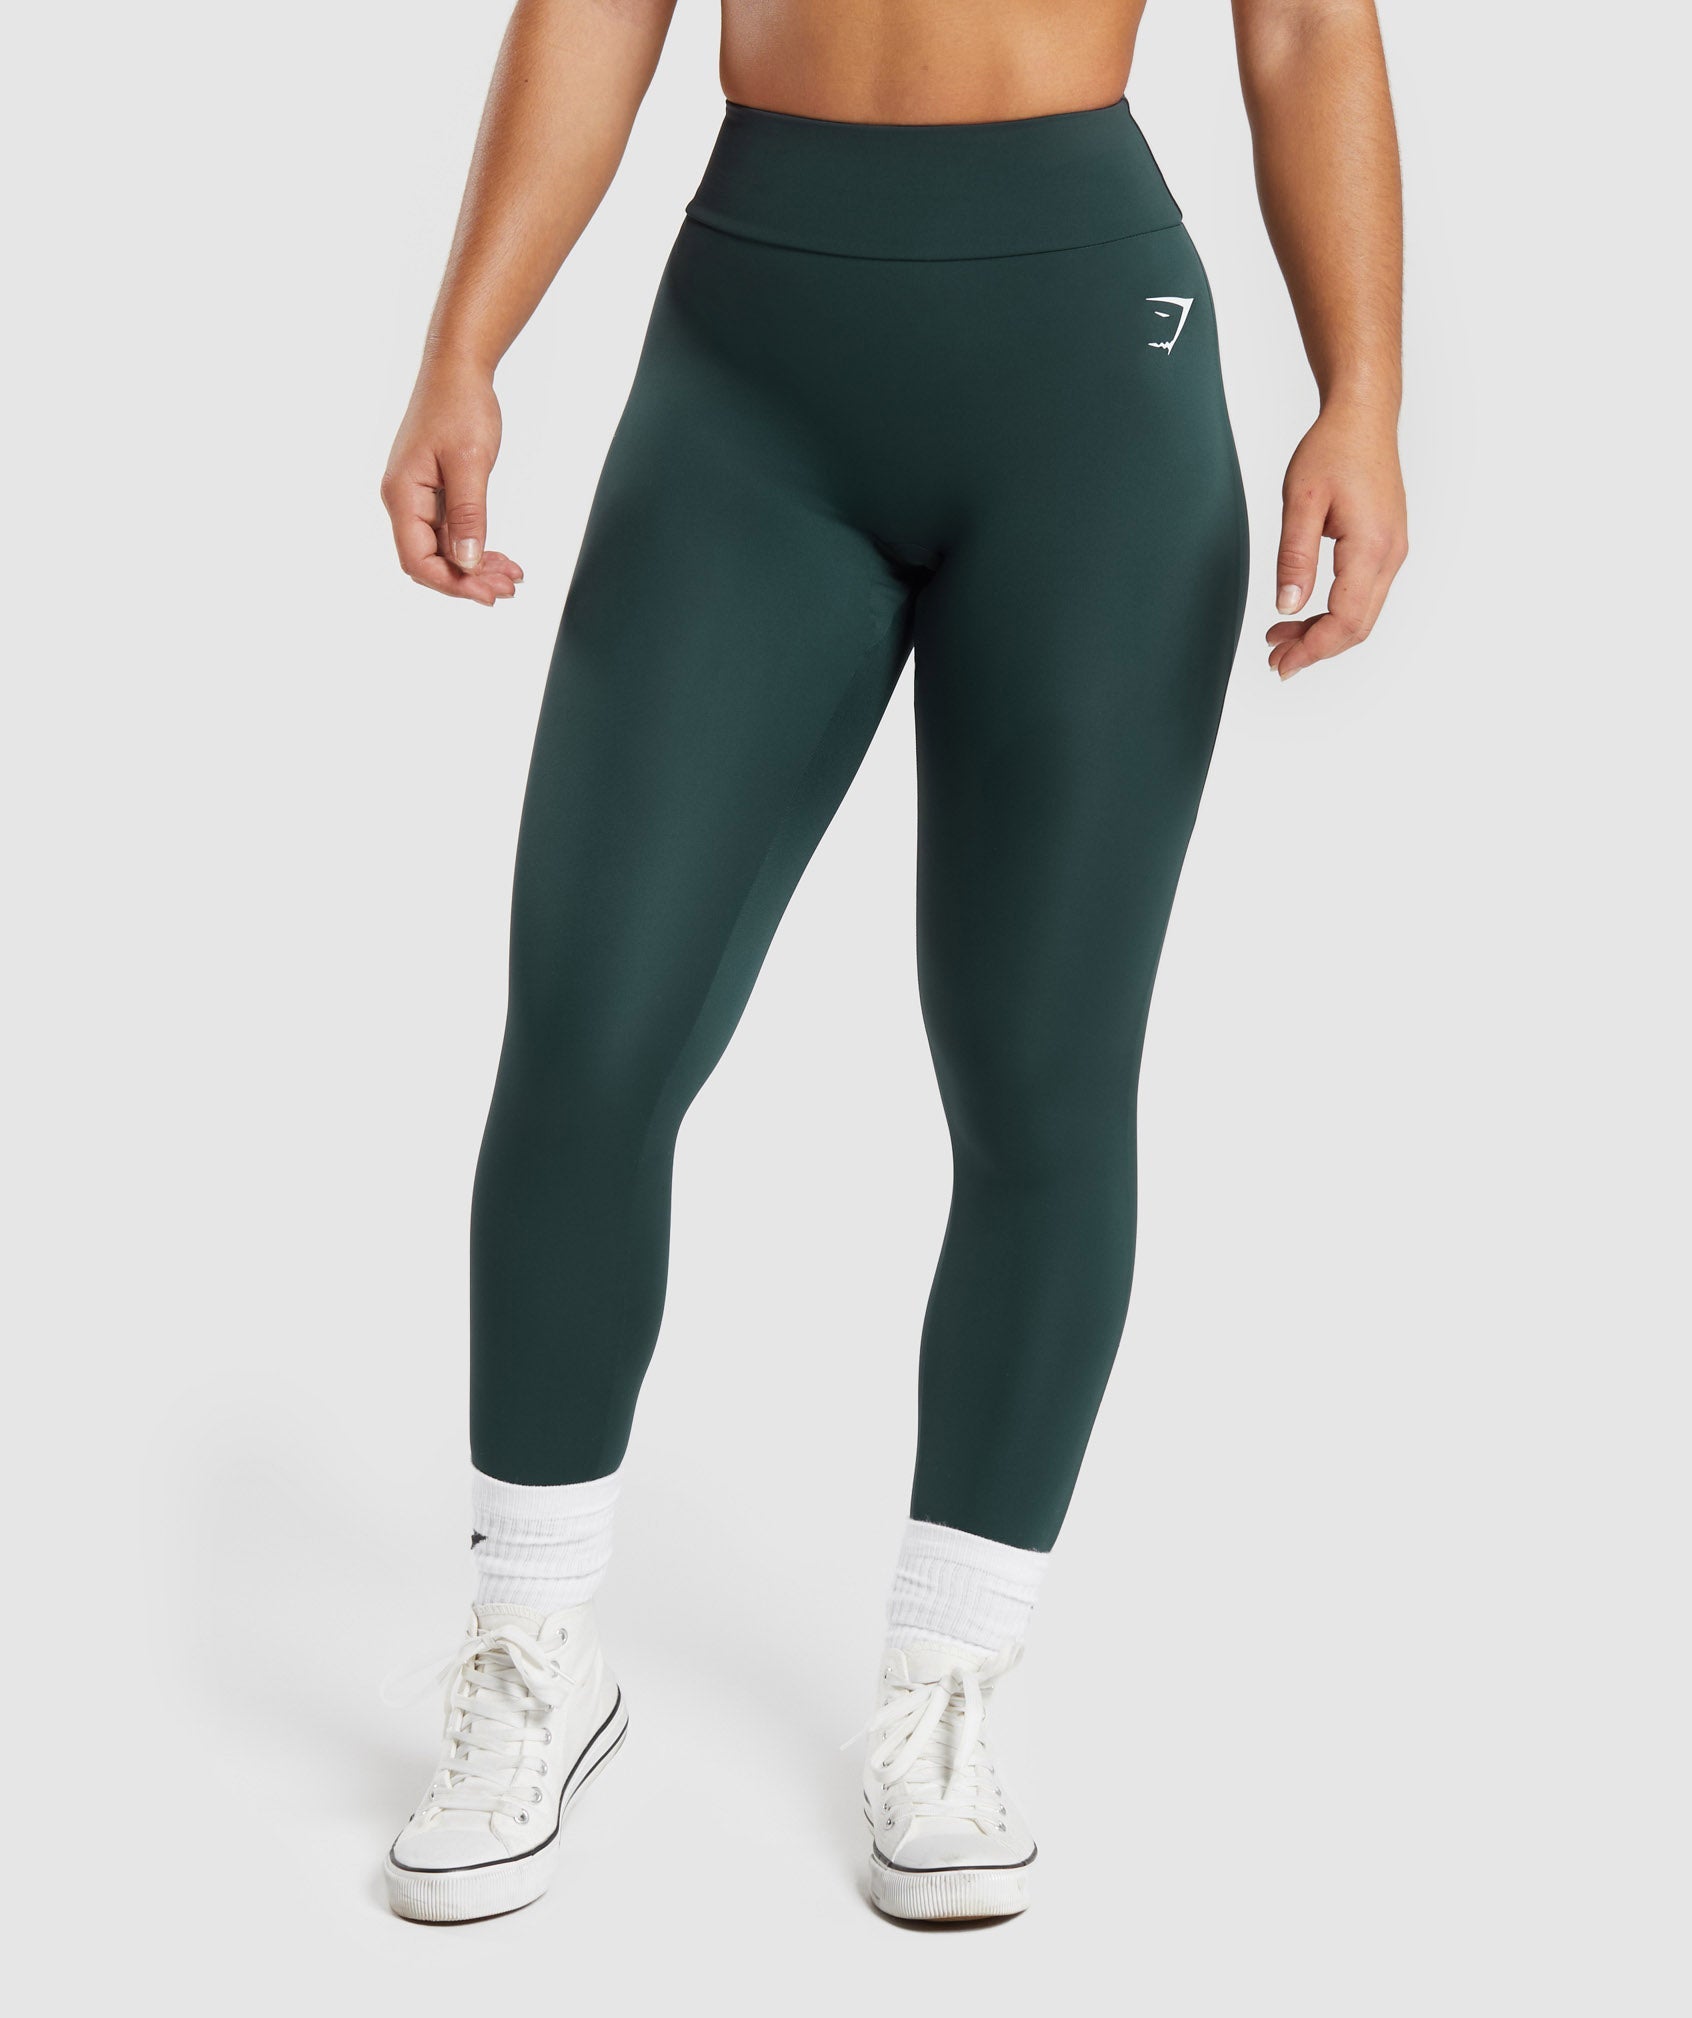 GS Power Regular Leggings in {{variantColor} is out of stock